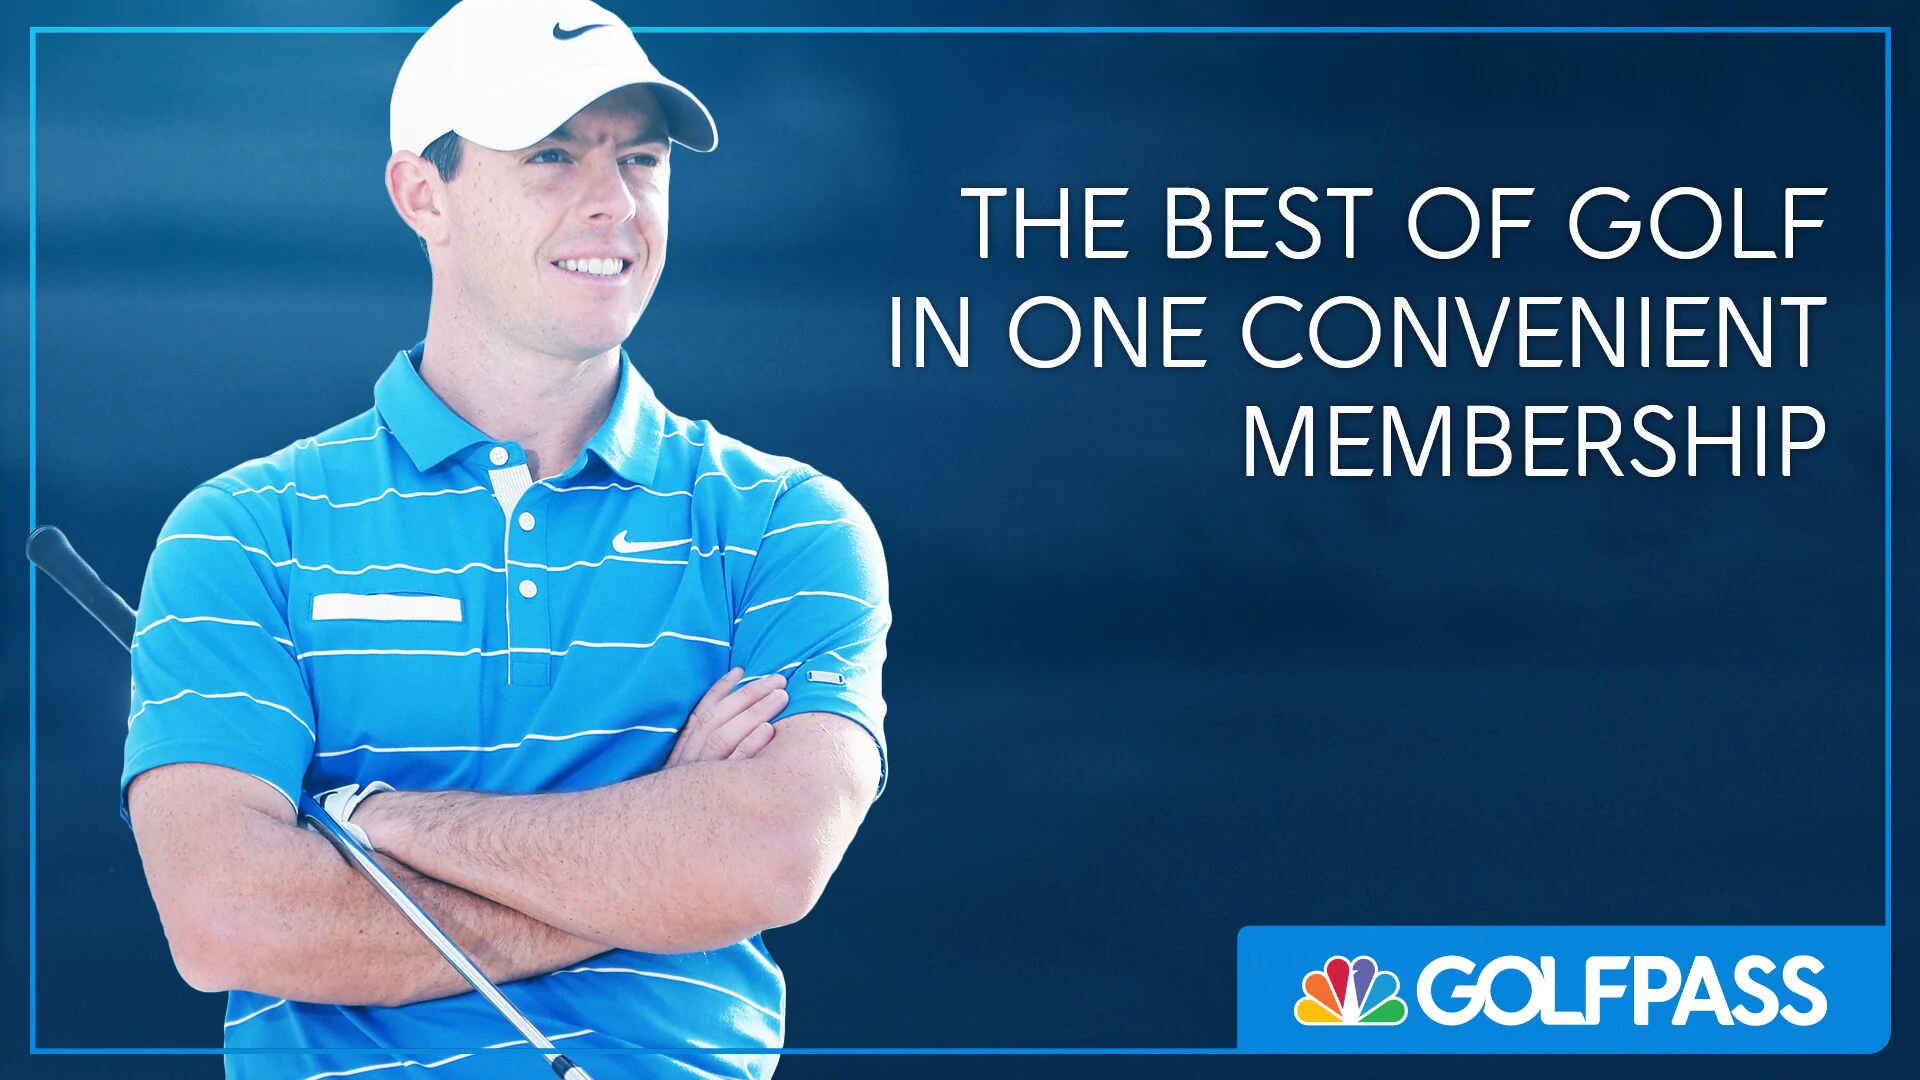 Introducing GolfPass with Rory McIlroy